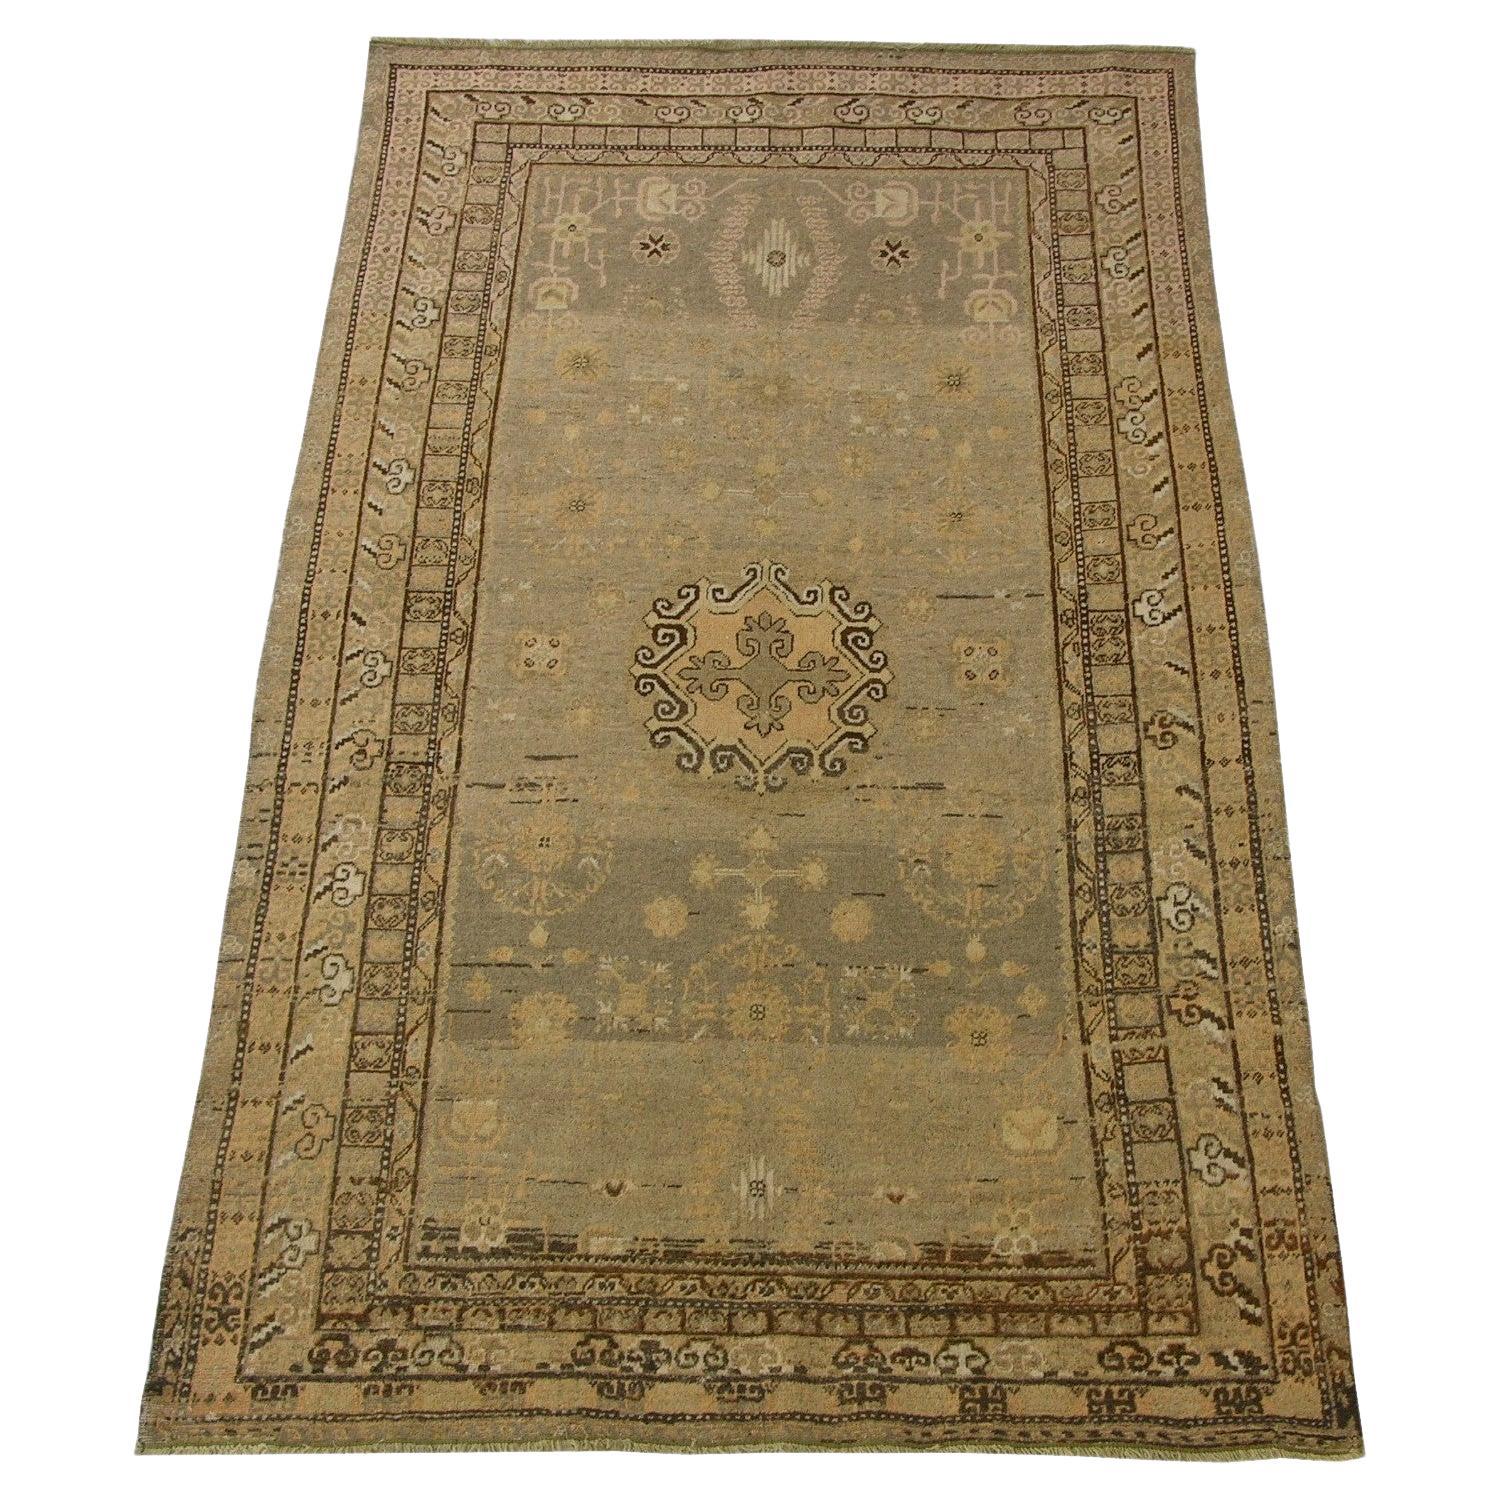 1900s Century Antique Samarkand Rug 10.8" X 5.9" For Sale